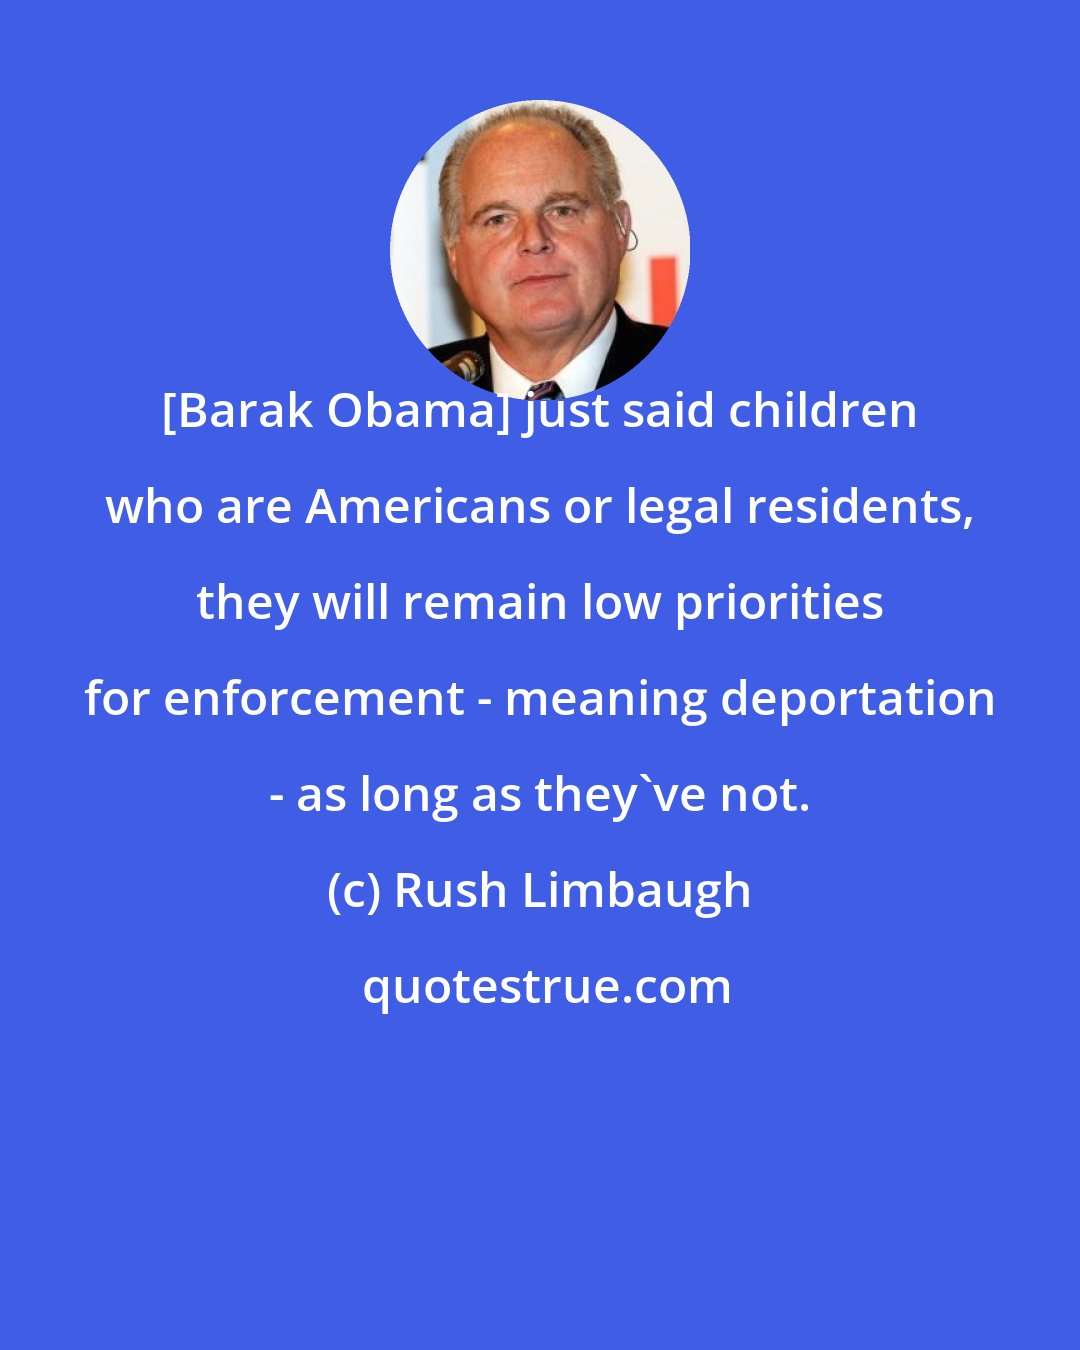 Rush Limbaugh: [Barak Obama] just said children who are Americans or legal residents, they will remain low priorities for enforcement - meaning deportation - as long as they've not.